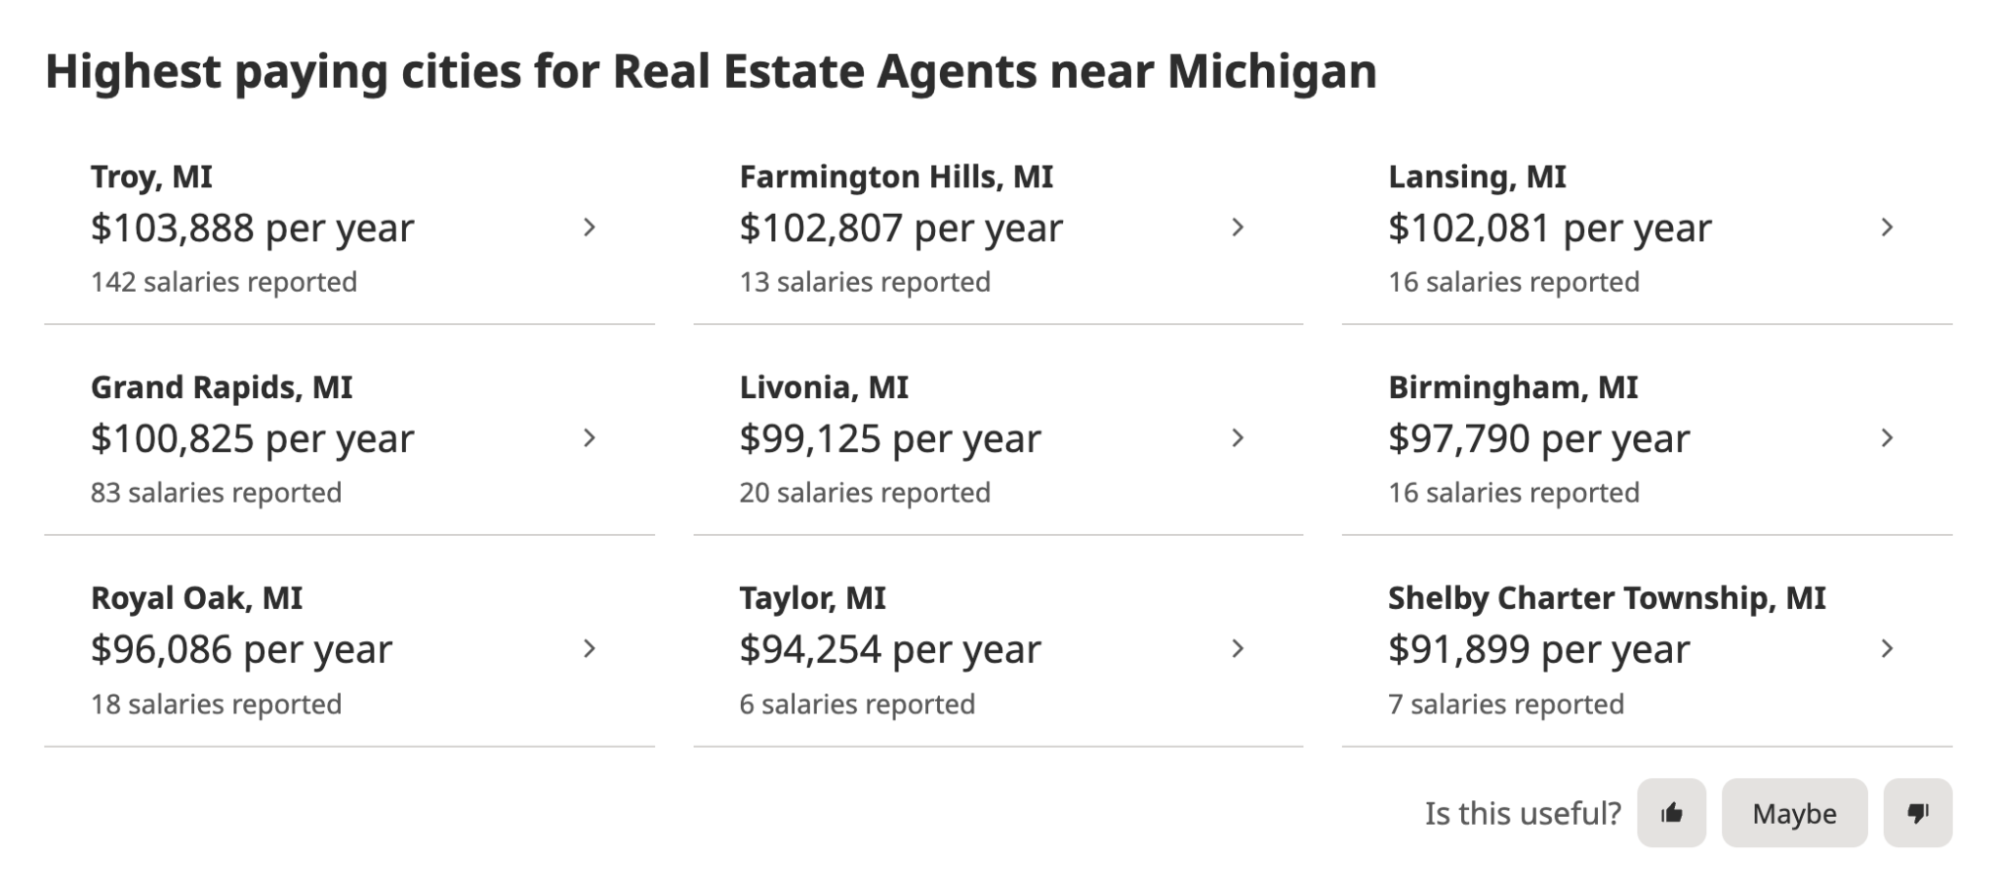 Information for highest paying cities for real estate agent in Michigan